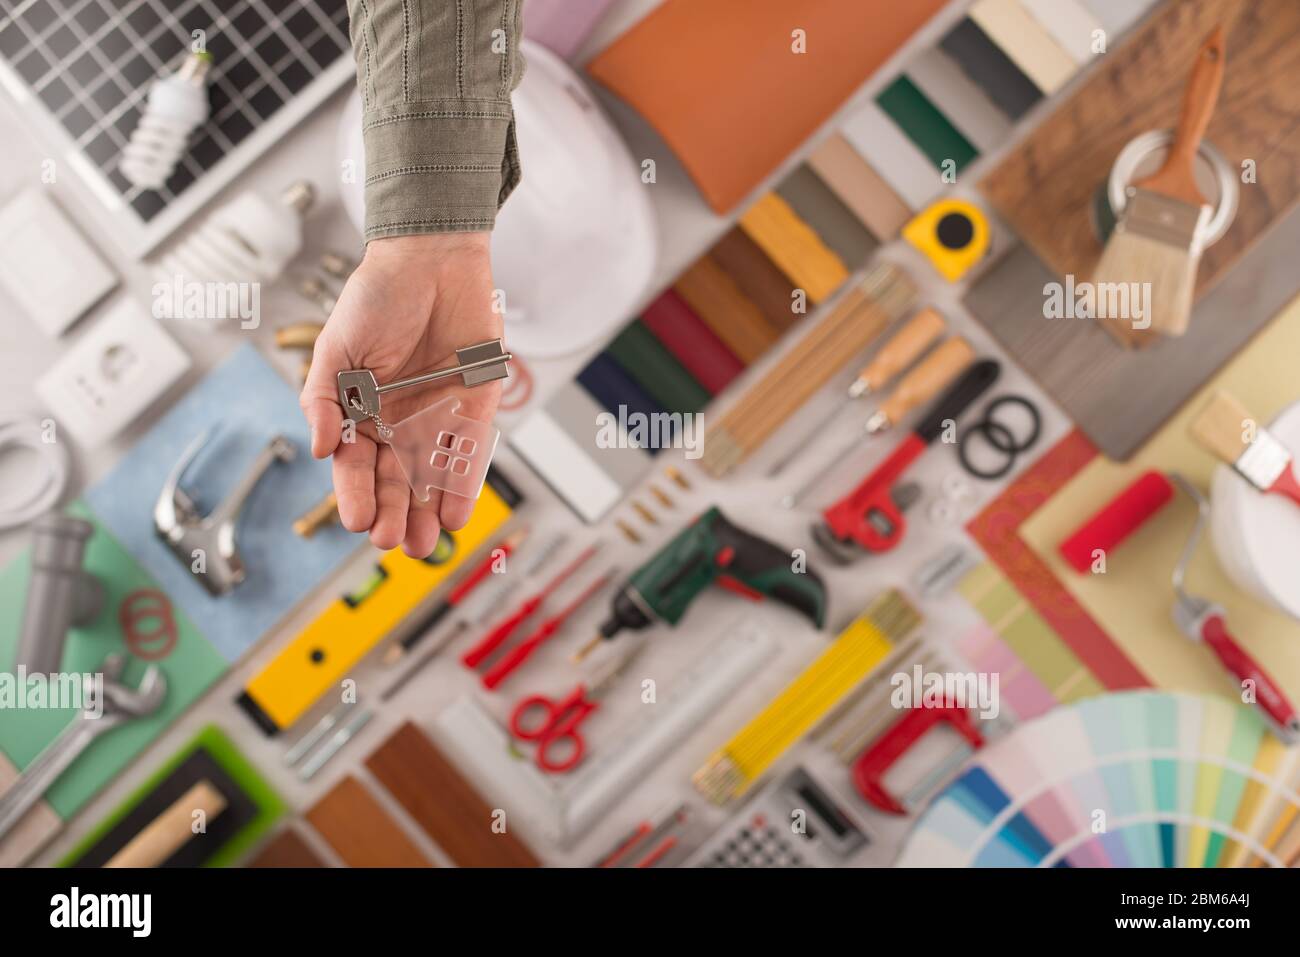 Male hand handing house keys, build and renovation tools on background, top view Stock Photo